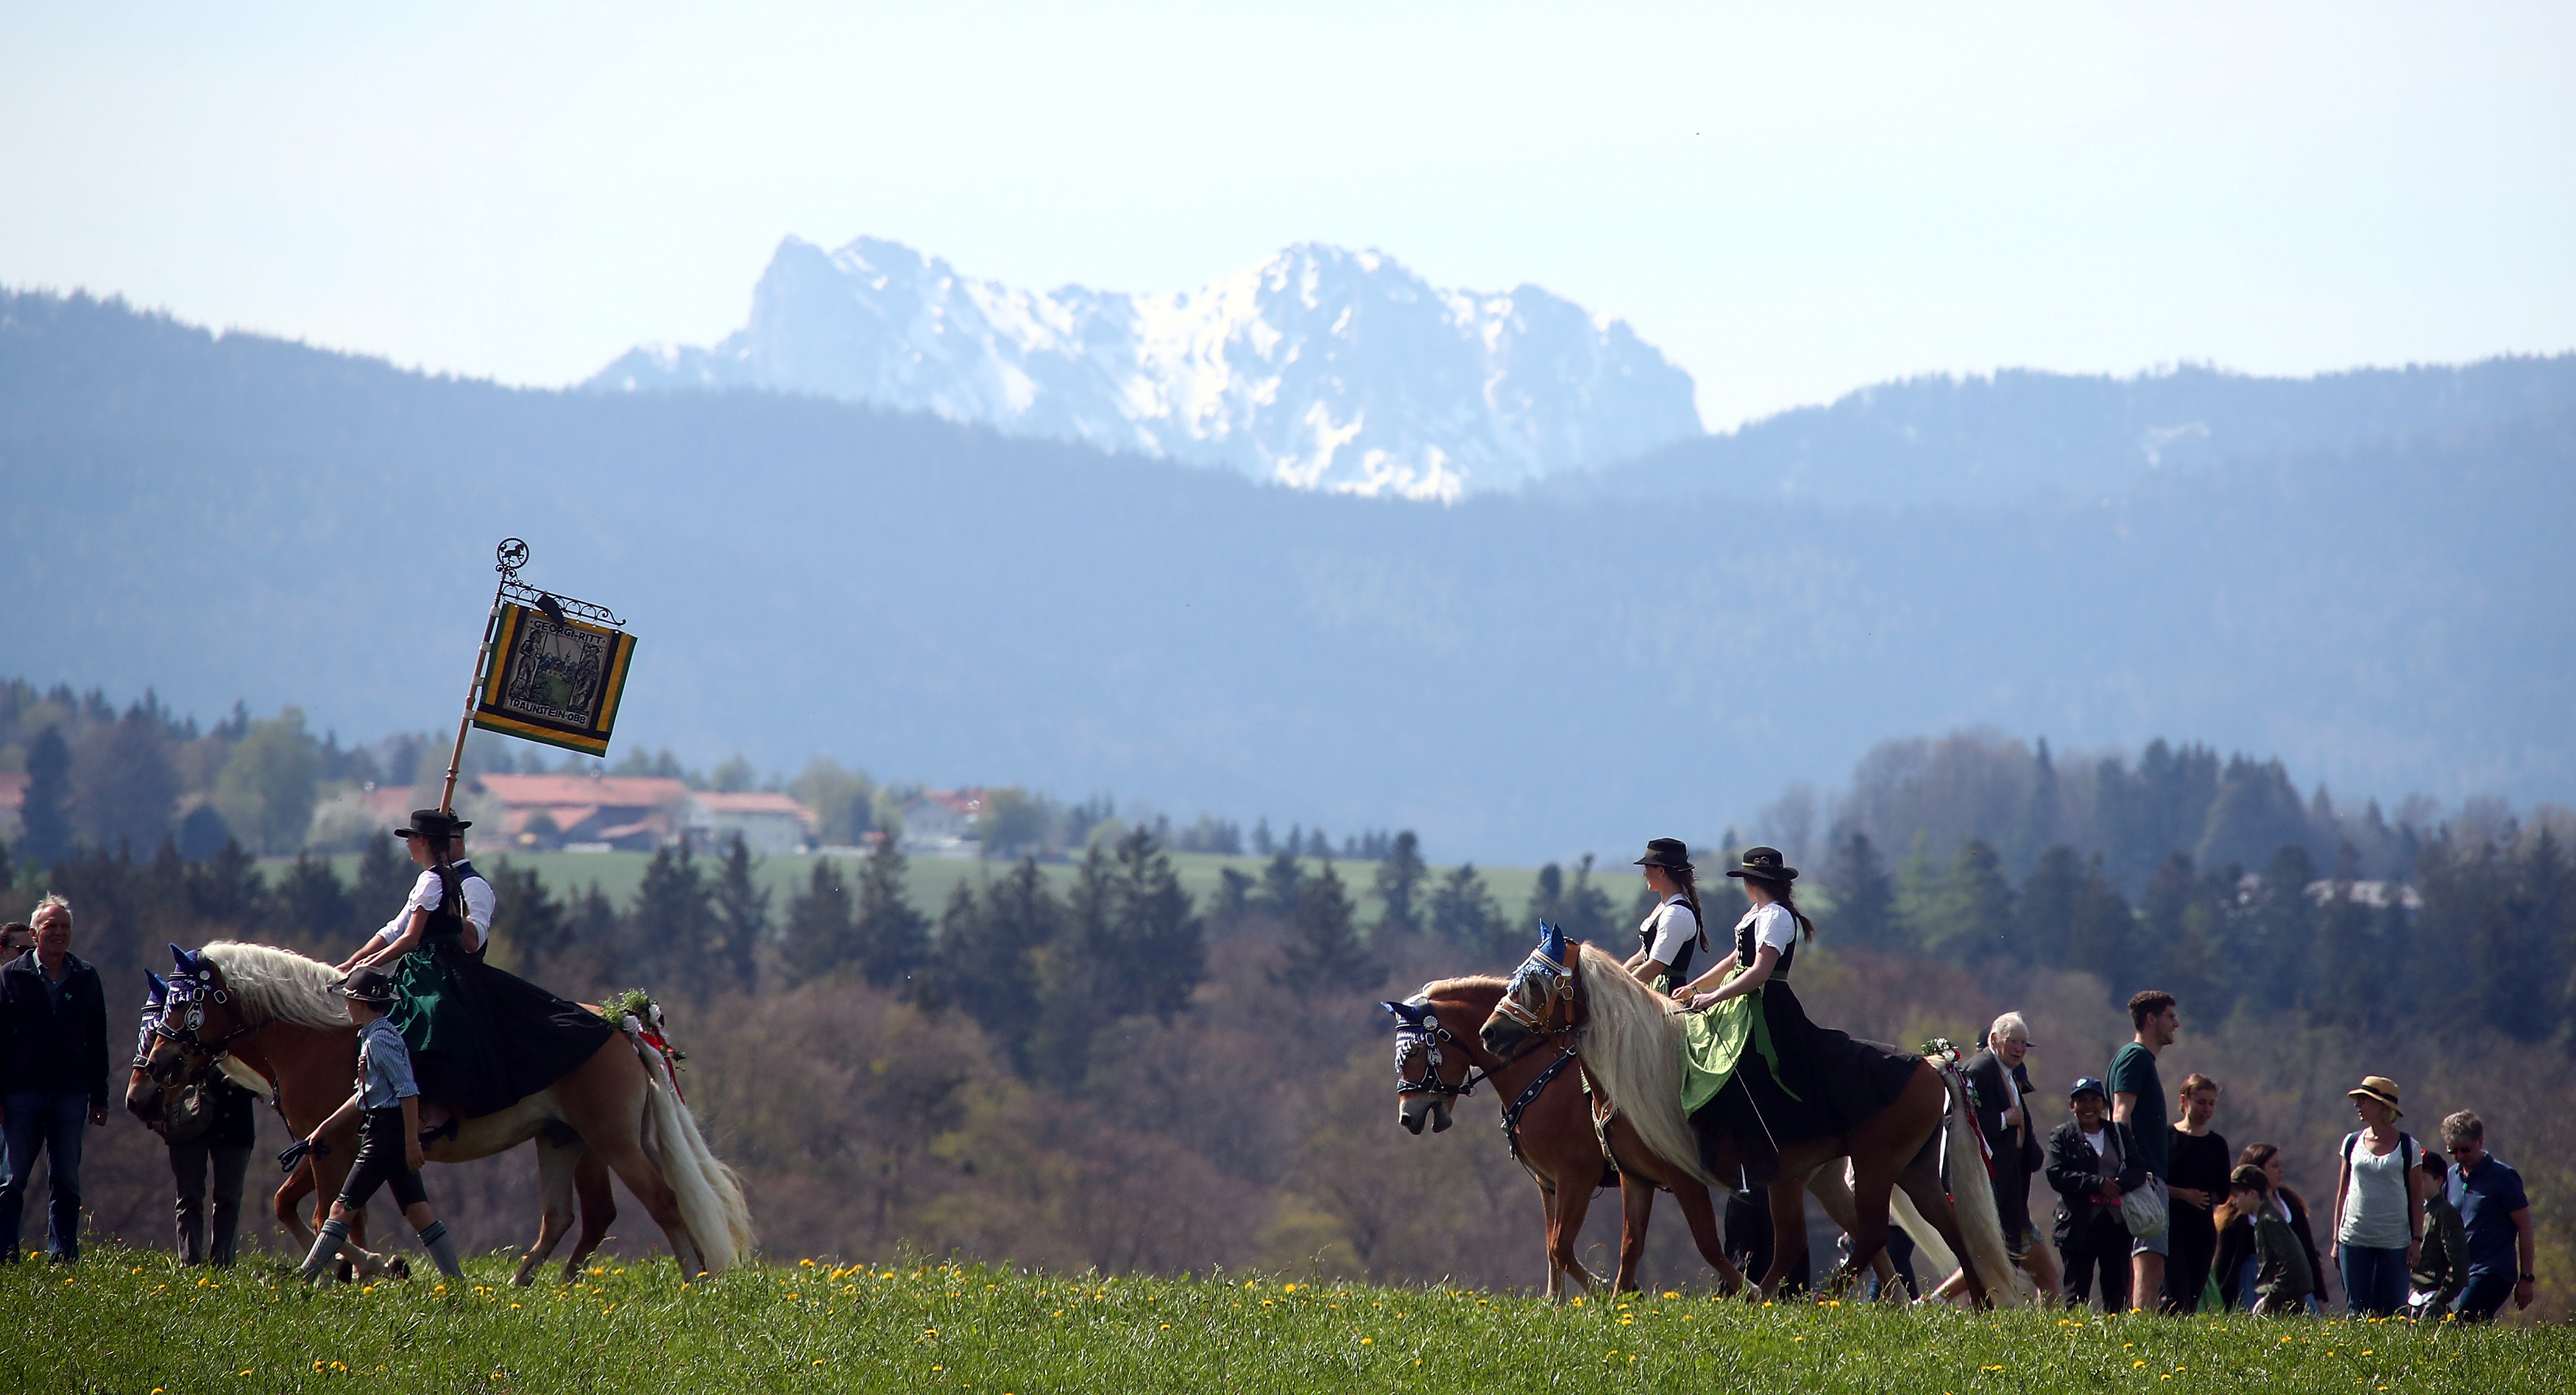 Pilgrims dressed in traditional clothes attend Georgi horse riding procession in Traunstein